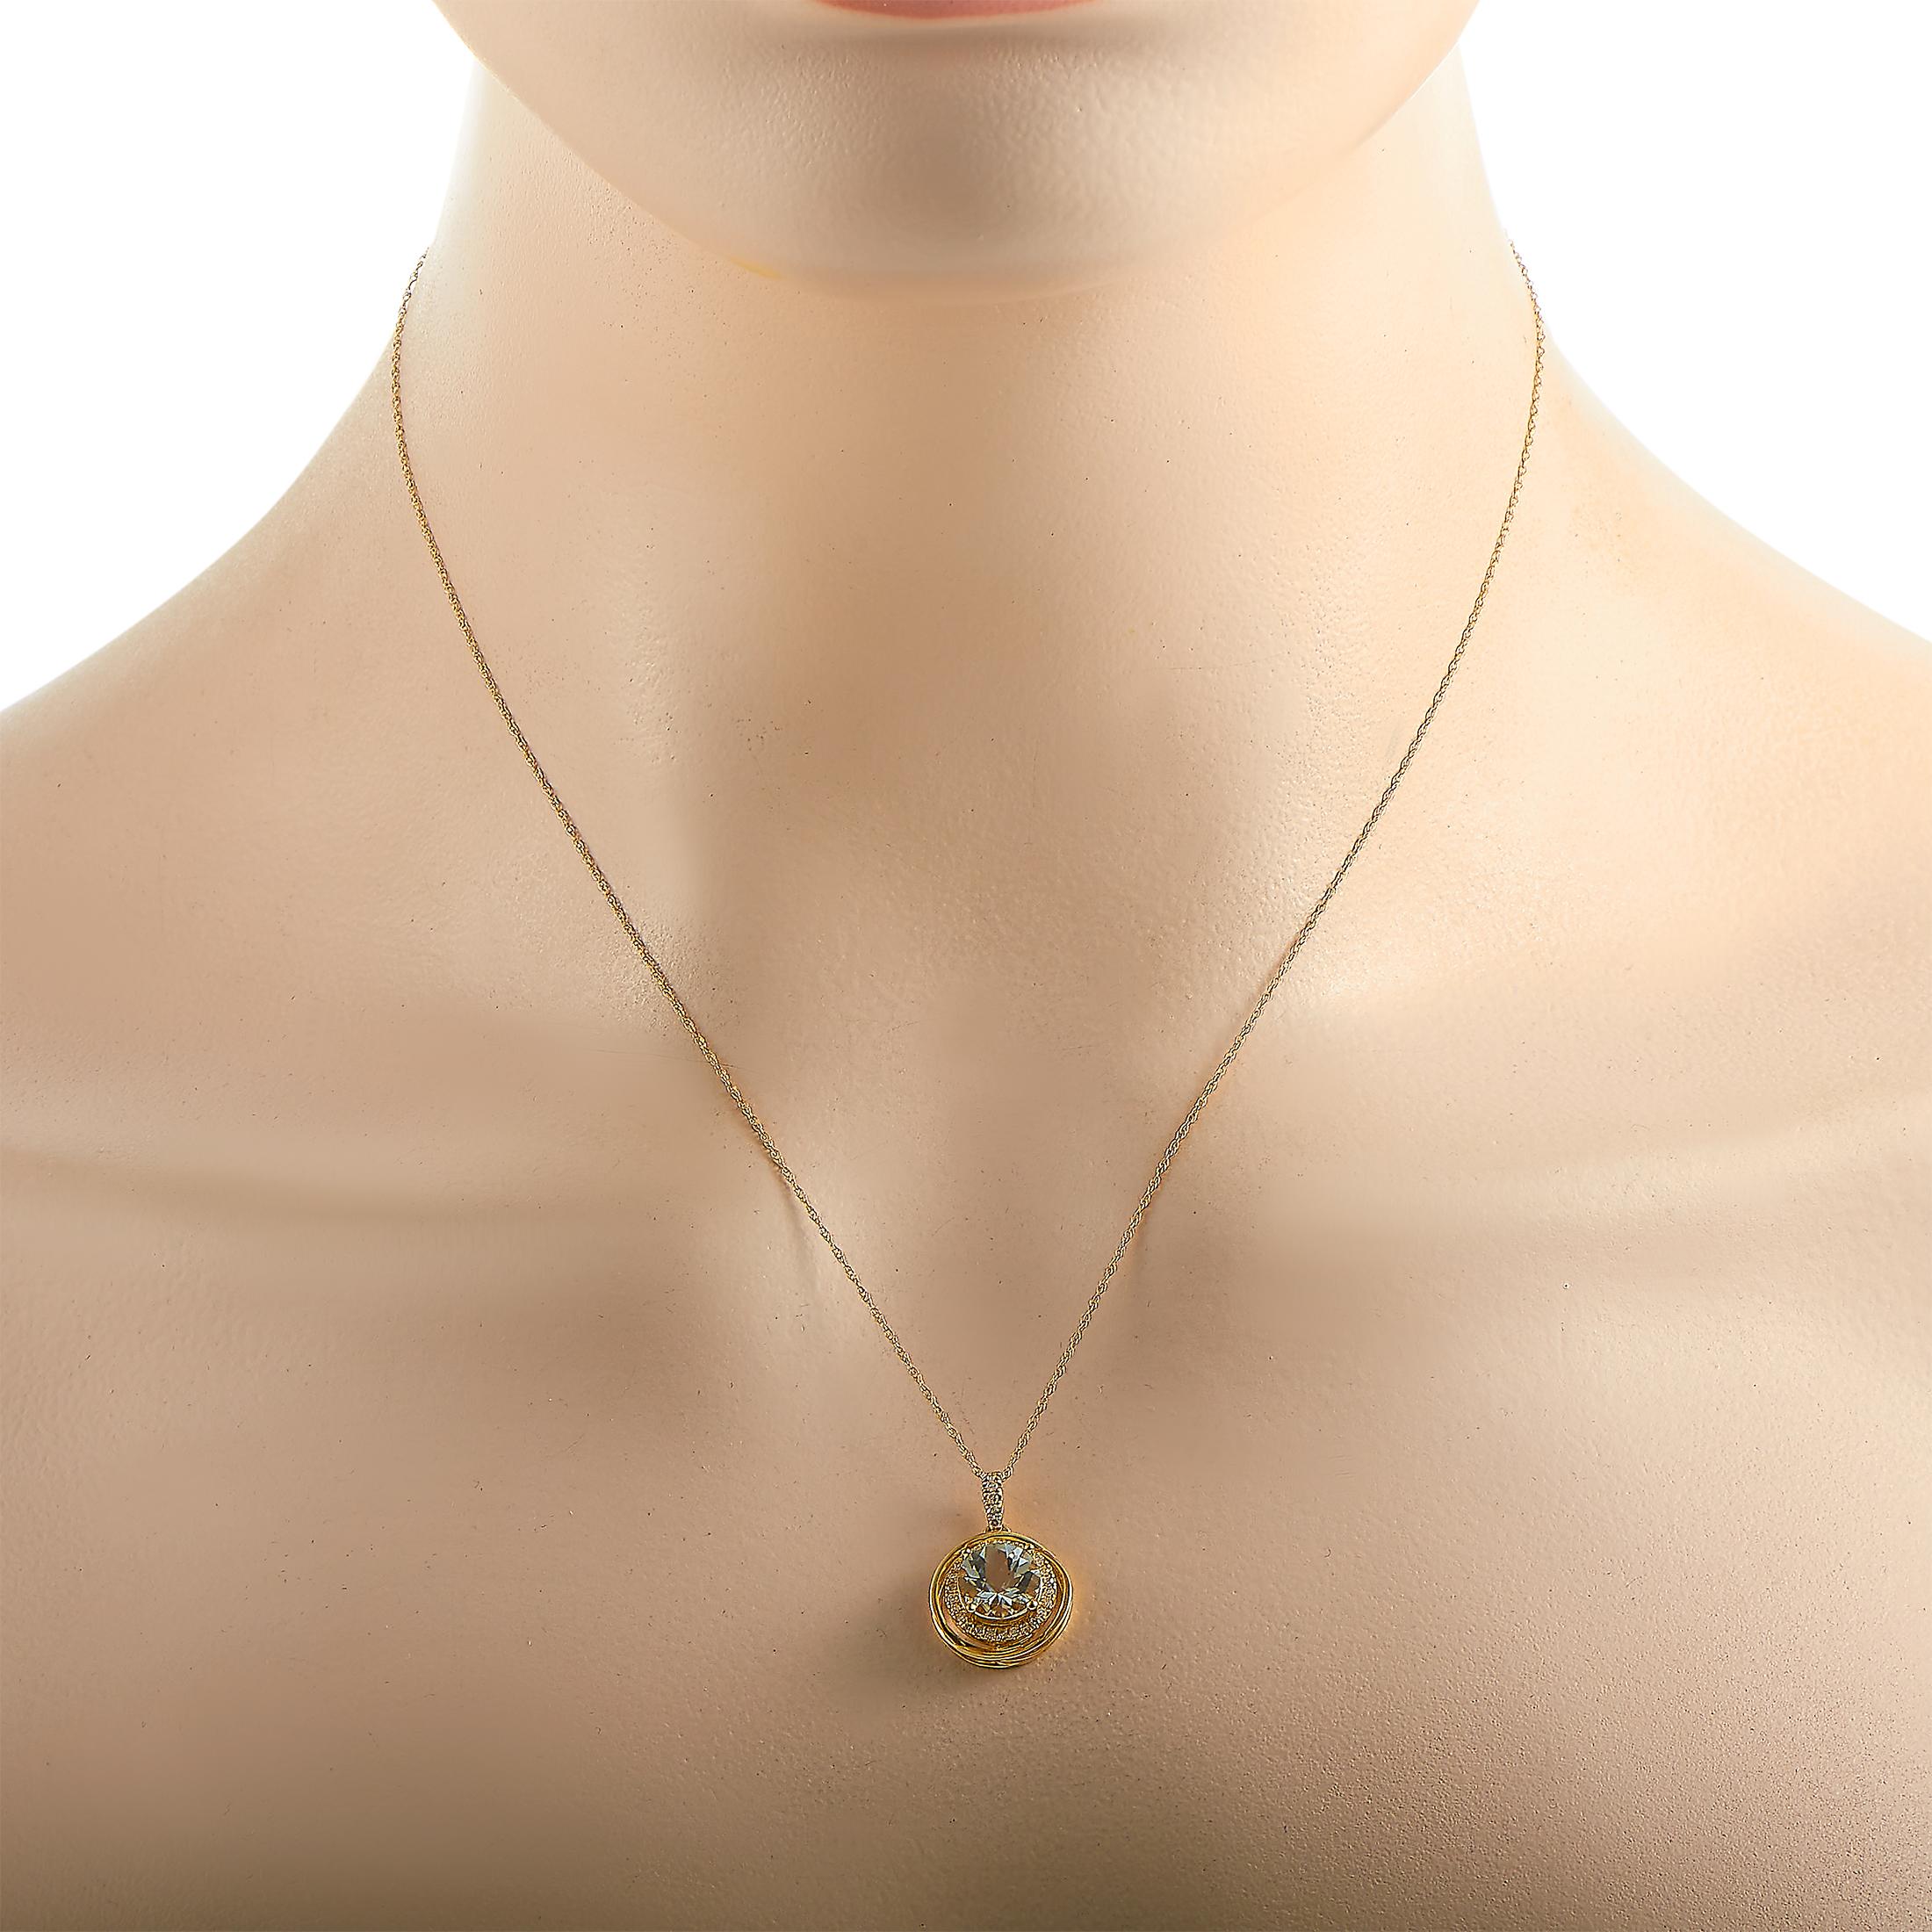 This LB Exclusive necklace is crafted from 14K yellow gold and weighs 2.7 grams. It is presented with an 18” chain and a pendant that measures 0.75” in length and 0.60” in width. The necklace is embellished with a topaz and a total of 0.13 carats of